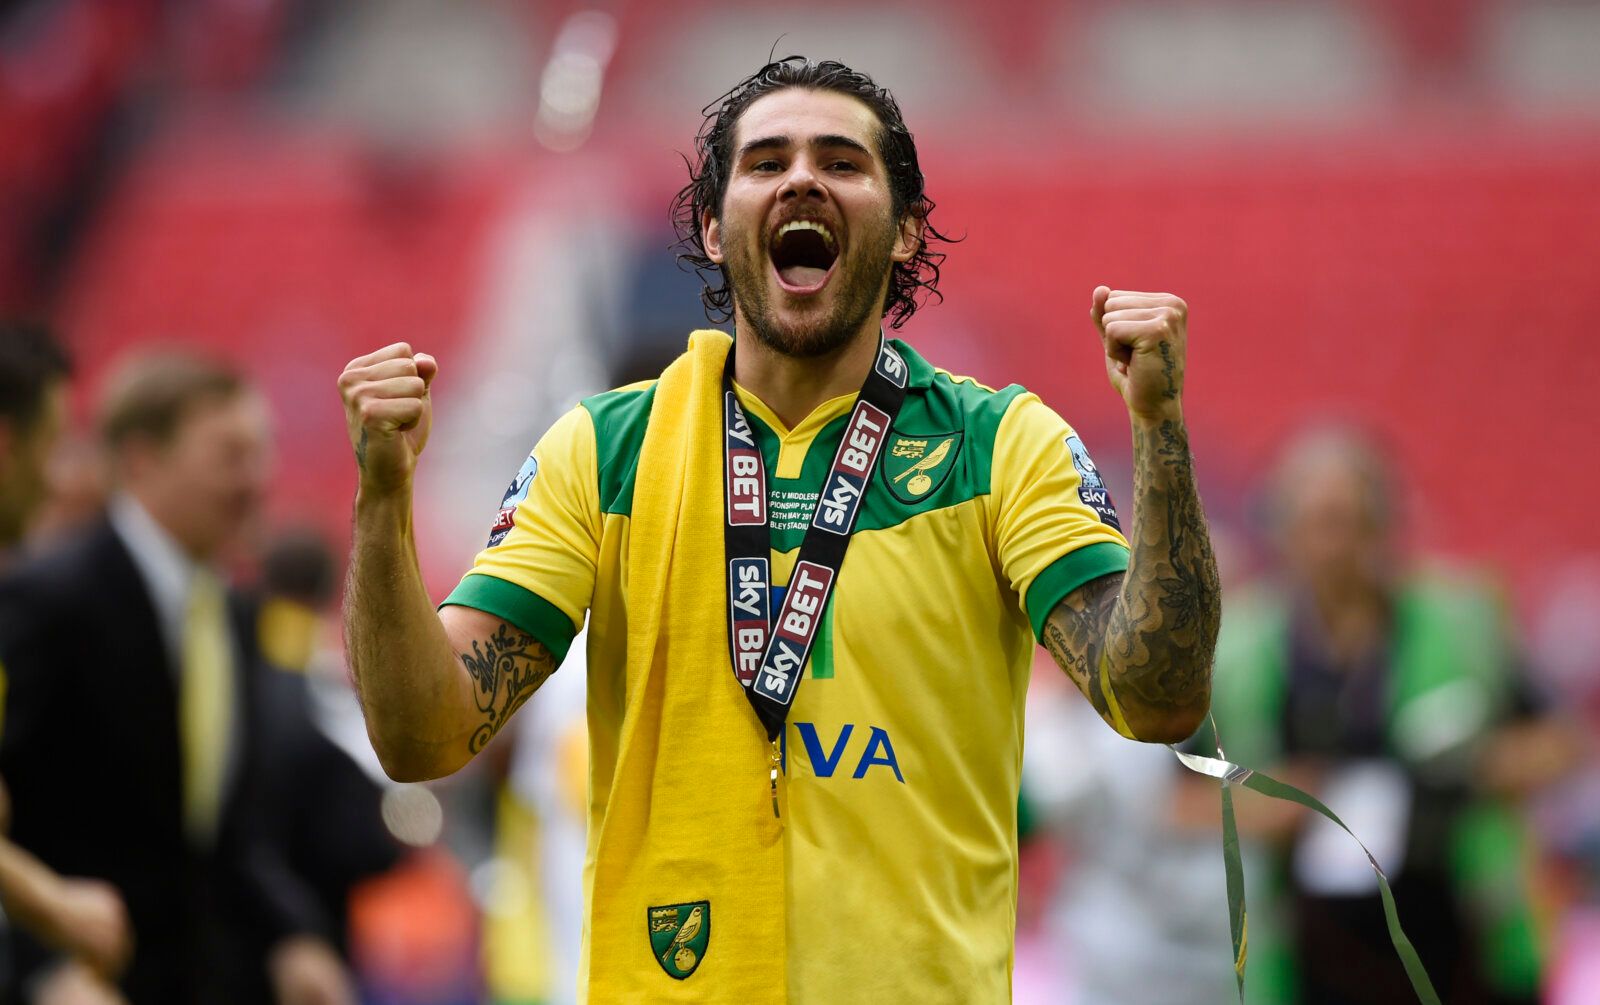 Football - Norwich City v Middlesbrough - Sky Bet Football League Championship Play-Off Final - Wembley Stadium - 25/5/15 
Norwich City's Bradley Johnson celebrates at full time after gaining promotion to the Barclays Premier League 
Action Images via Reuters / Tony O'Brien 
Livepic 
EDITORIAL USE ONLY. No use with unauthorized audio, video, data, fixture lists, club/league logos or 